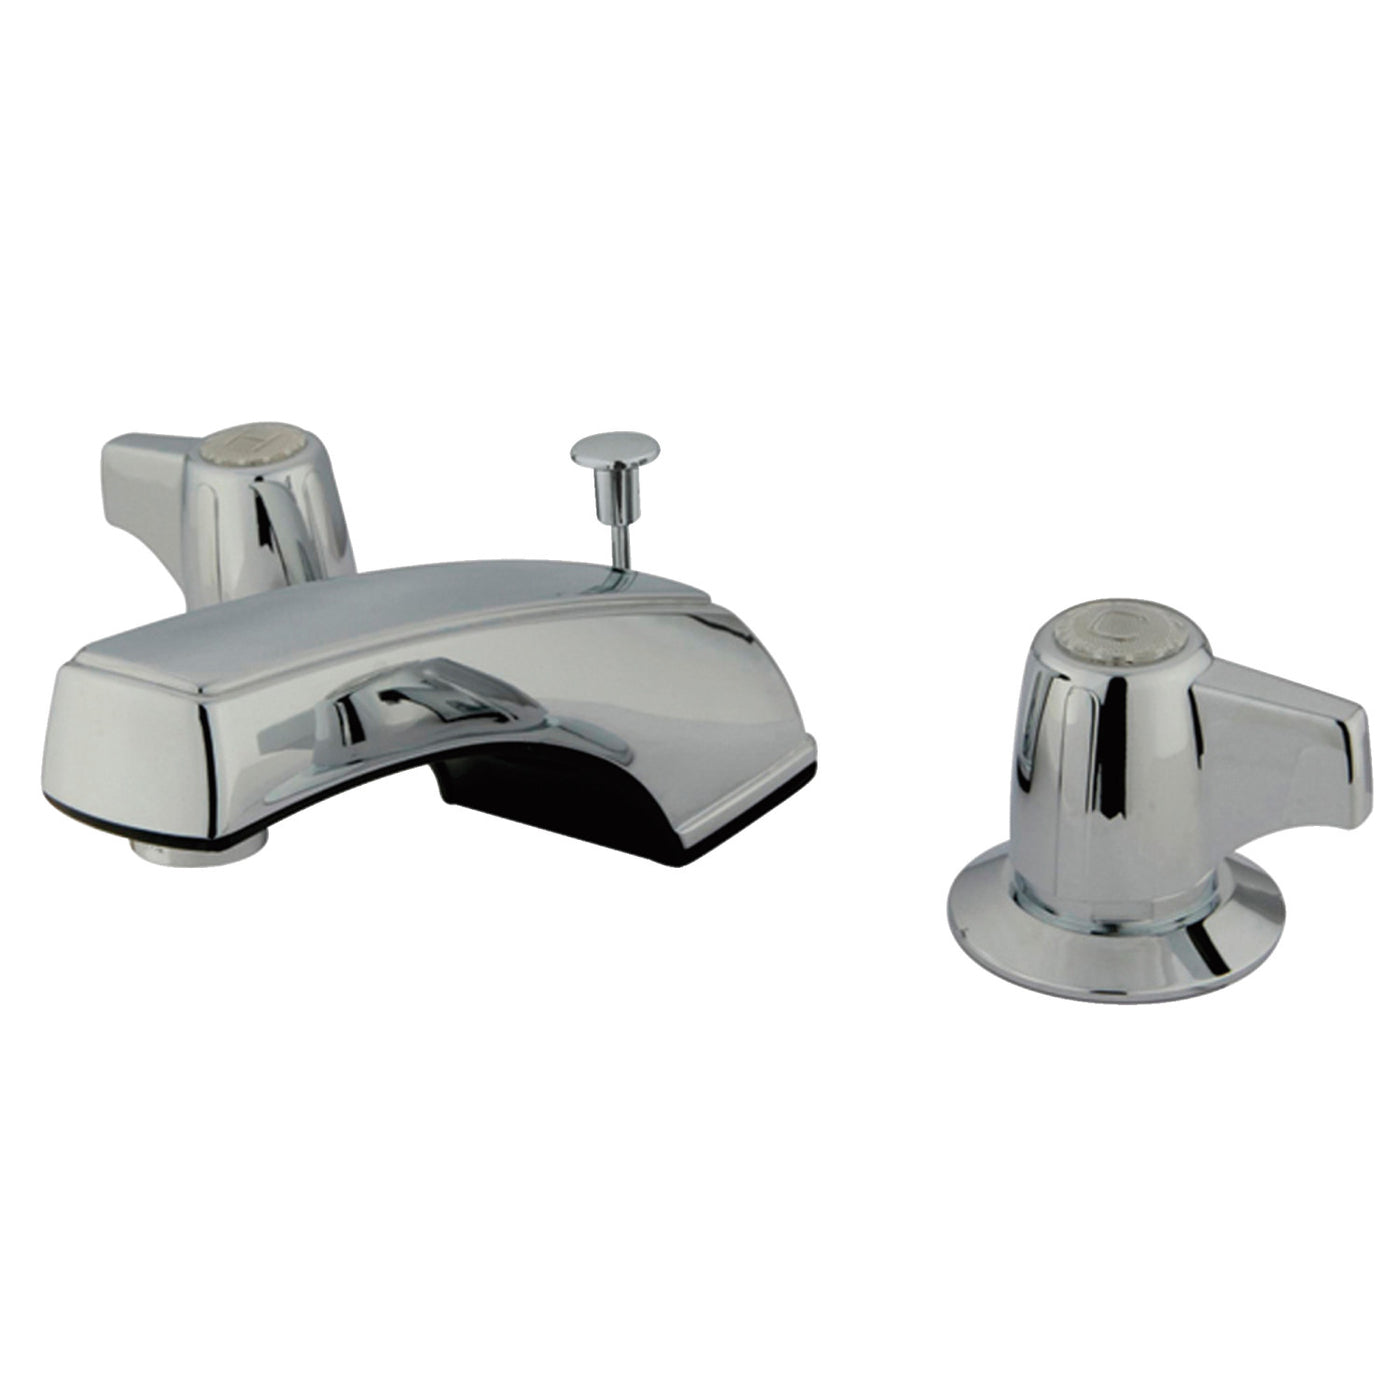 Elements of Design EB920B Widespread Bathroom Faucet with Retail Pop-Up, Polished Chrome